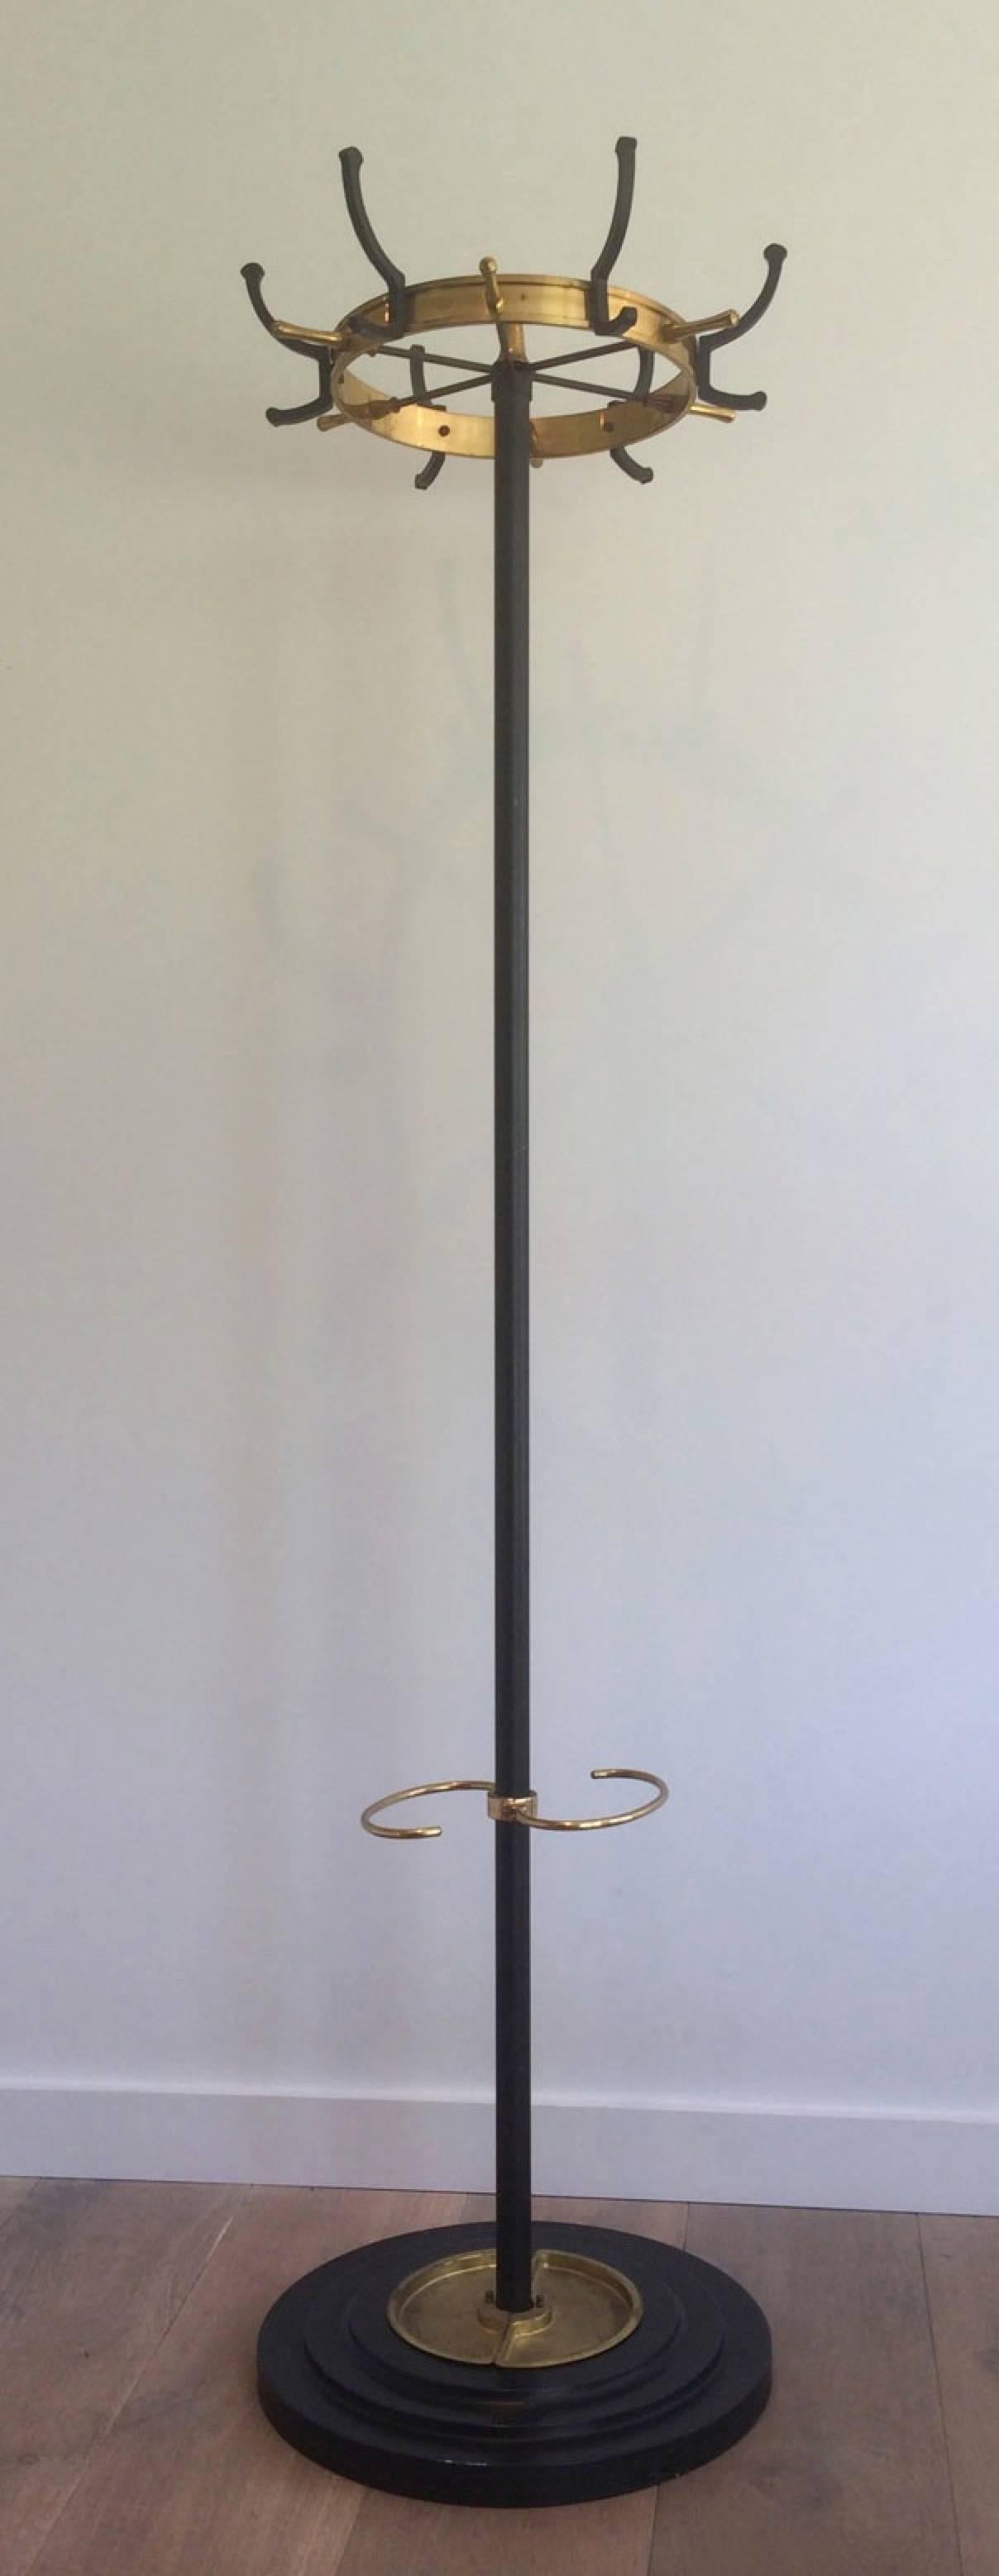 Black lacquered steel and brass coat rack with 12 hooks and brass umbrella stand at base, circa 1940.

This coat rack is currently in France, please allow 2 to 4 weeks delivery to New York. Shipping costs from France to our warehouse in New York